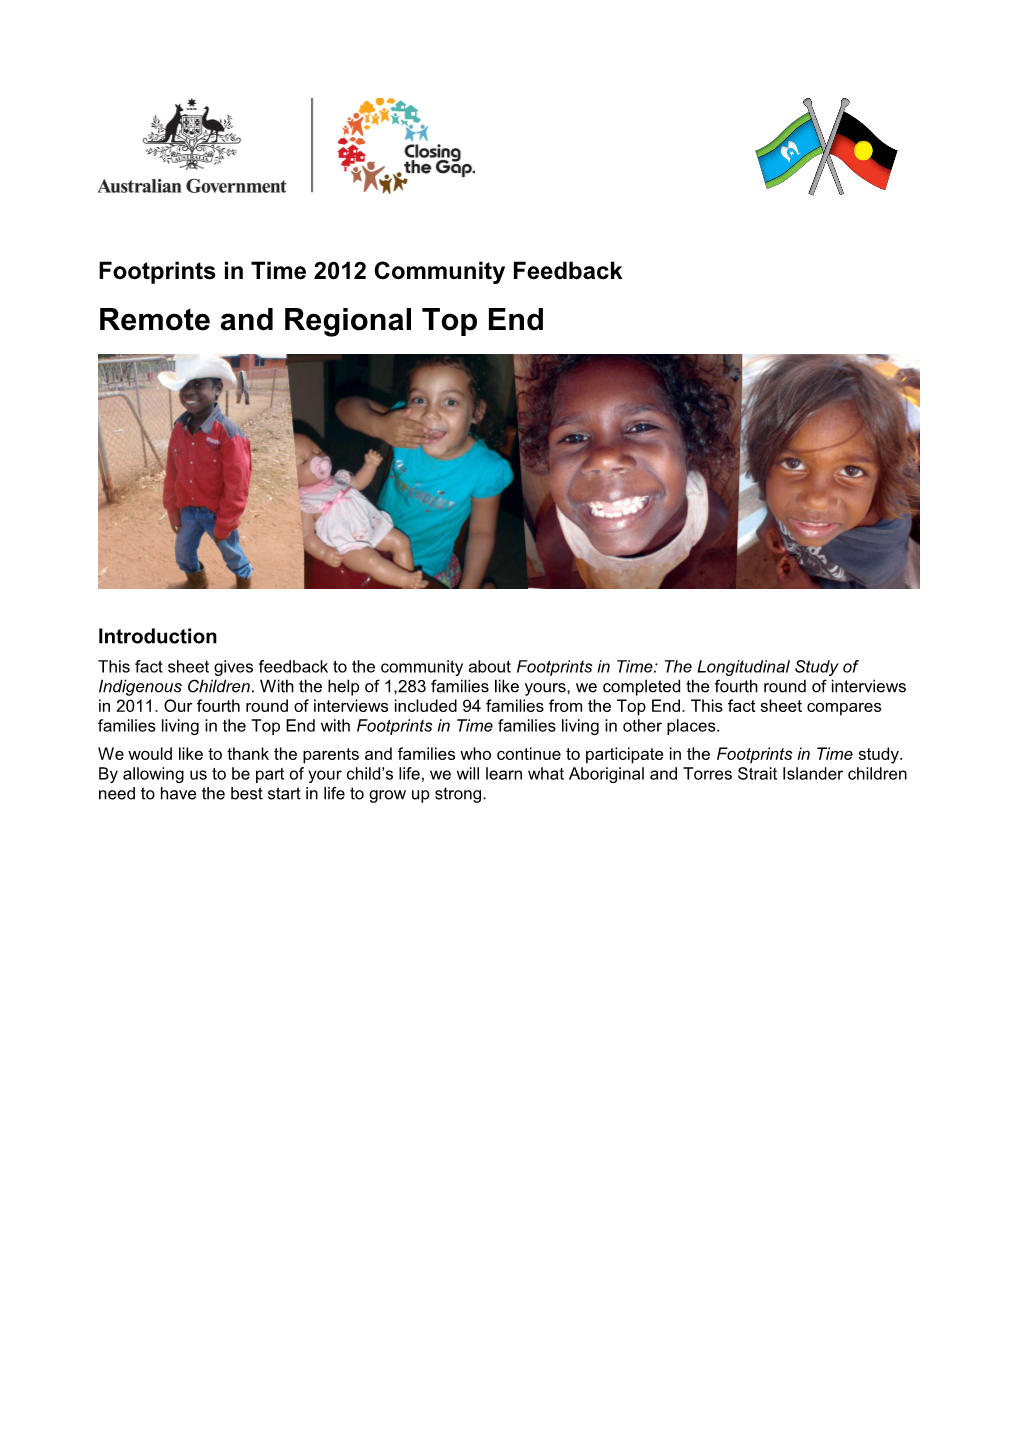 Footprints in Time 2012 Community Feedback - Remote and Regional Top End